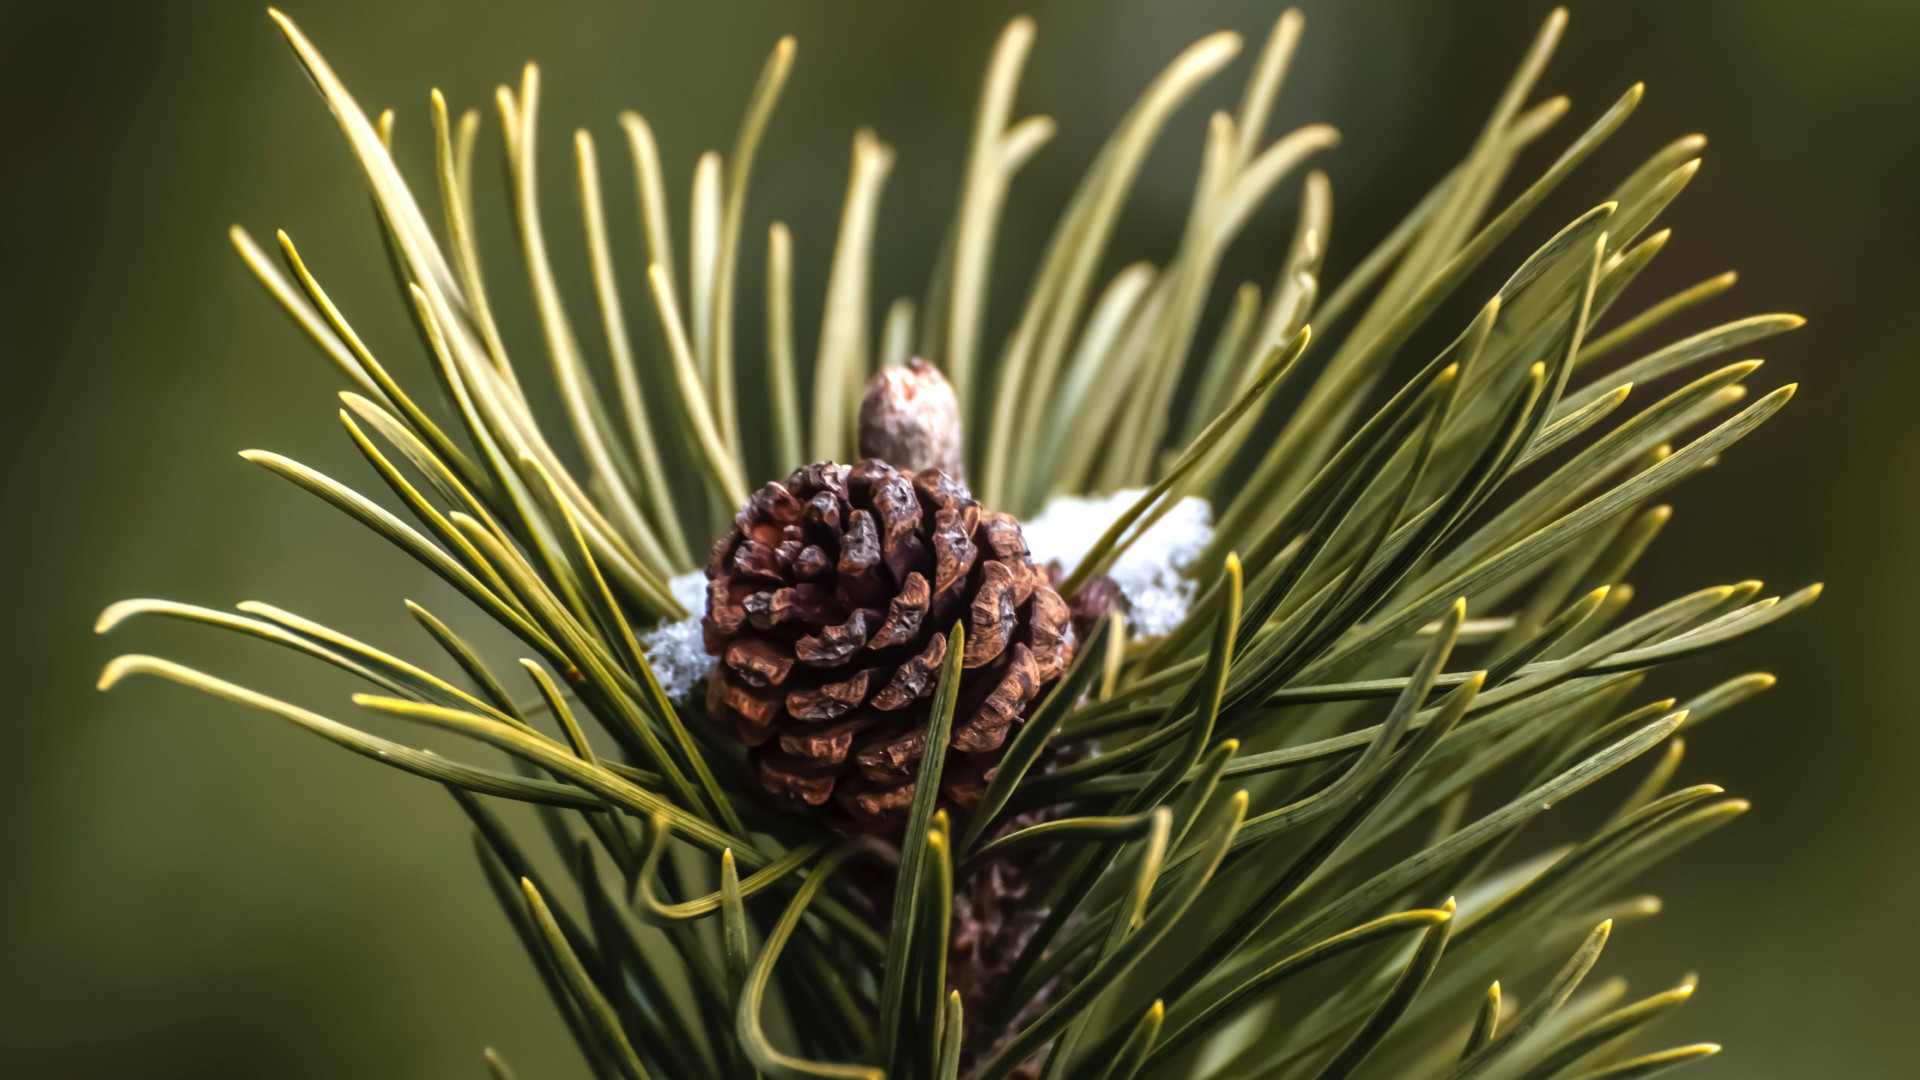 Cone and pine needles wallpaper 1920x1080